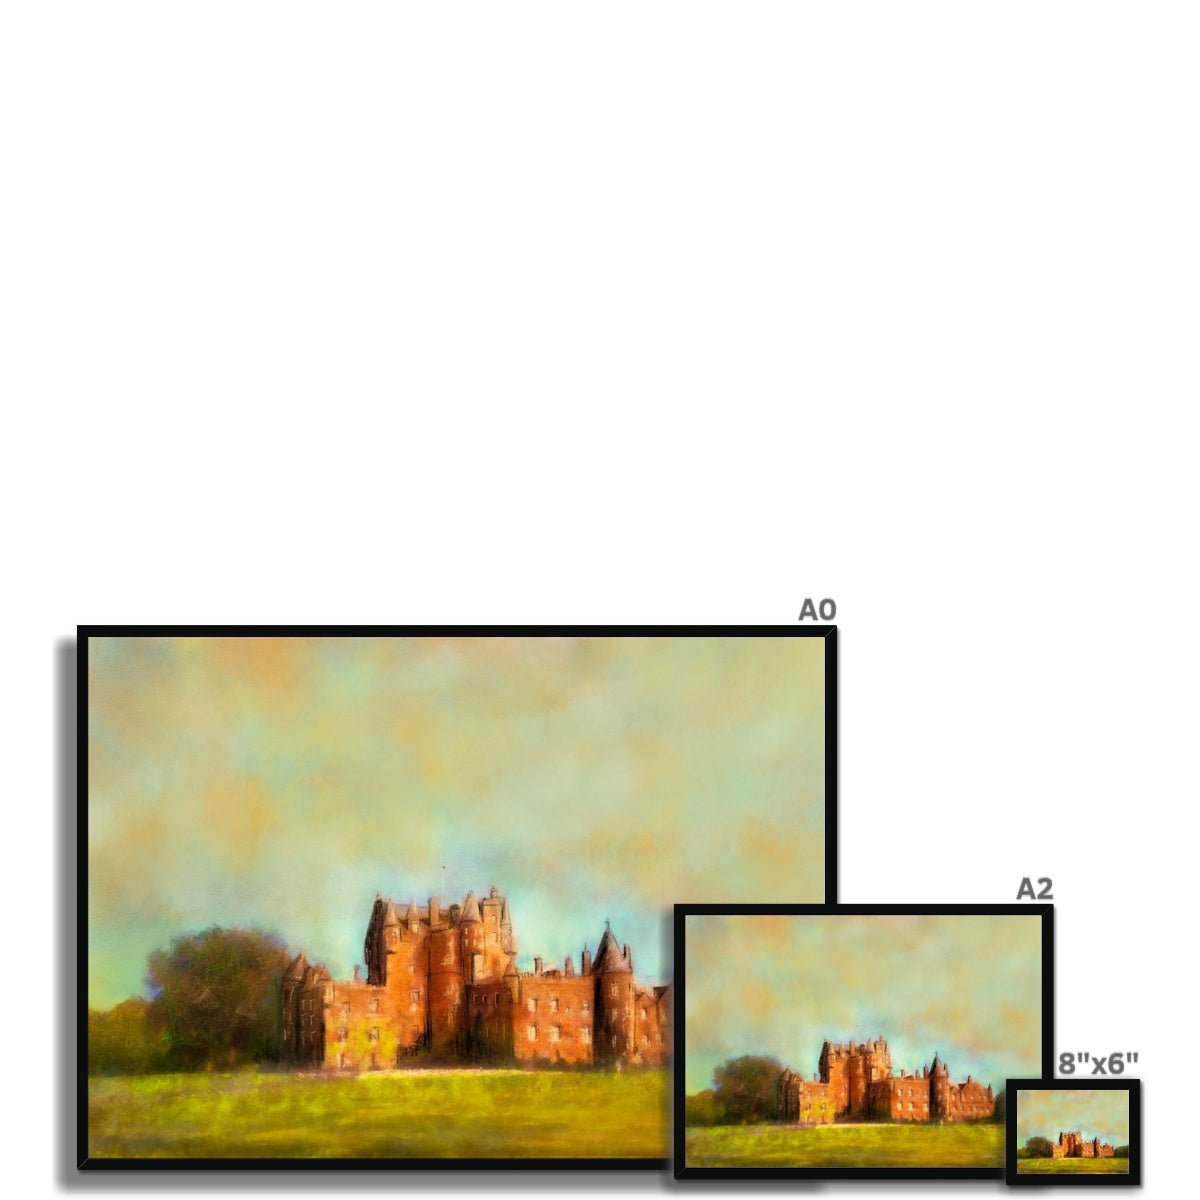 Glamis Castle Painting | Framed Prints From Scotland-Framed Prints-Historic & Iconic Scotland Art Gallery-Paintings, Prints, Homeware, Art Gifts From Scotland By Scottish Artist Kevin Hunter